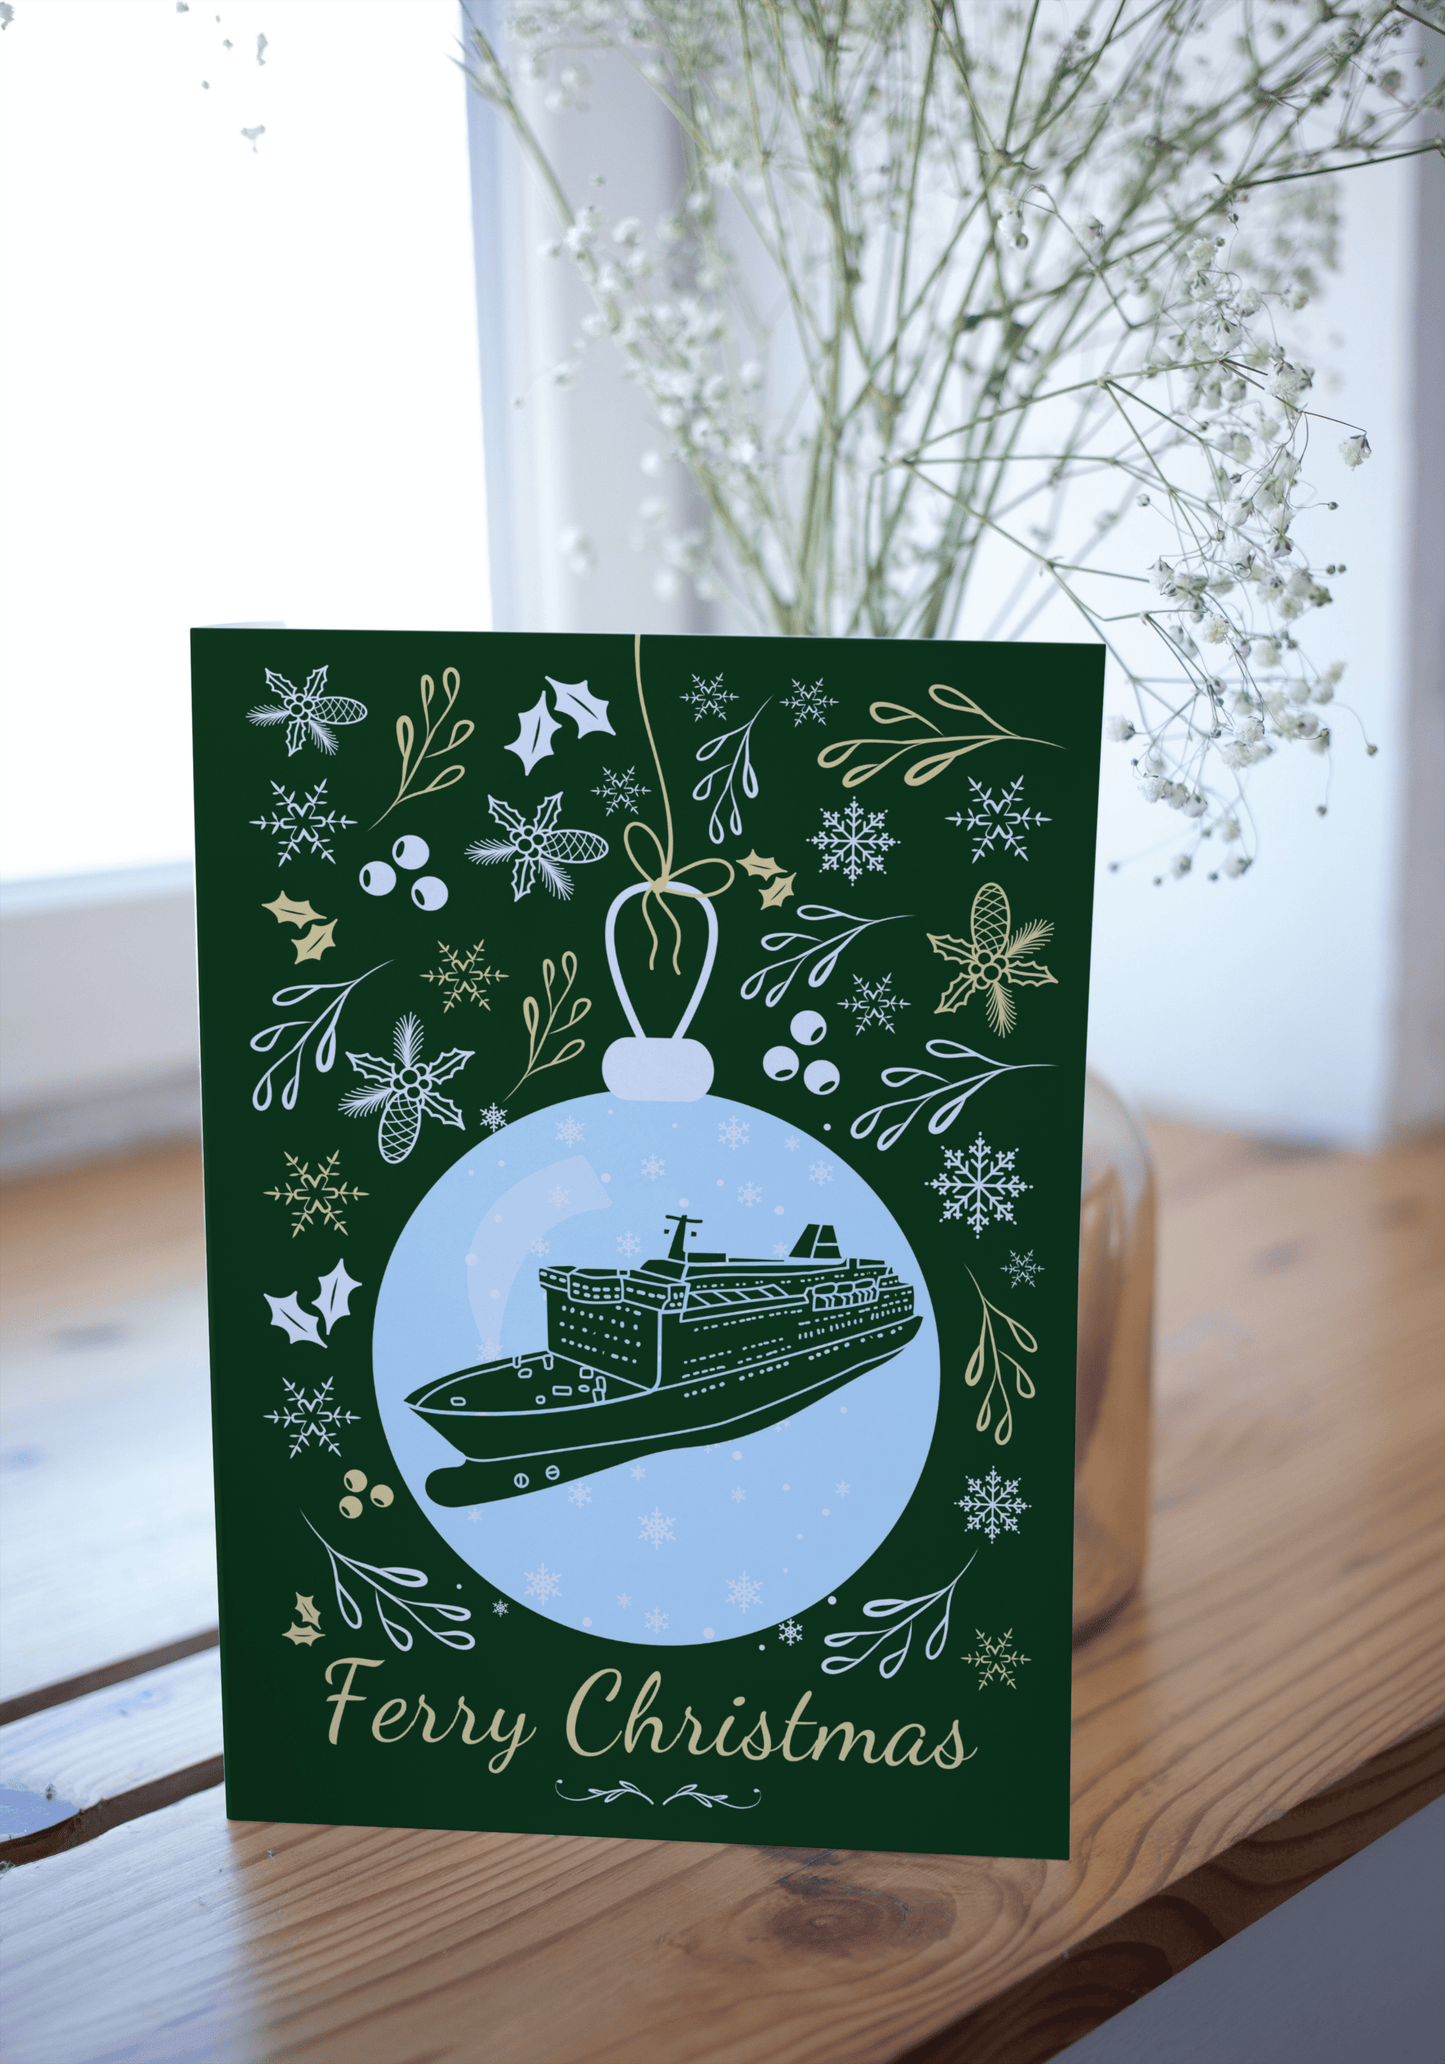 Nautical Christmas card (Ferry Christmas) Great Harbour Gifts